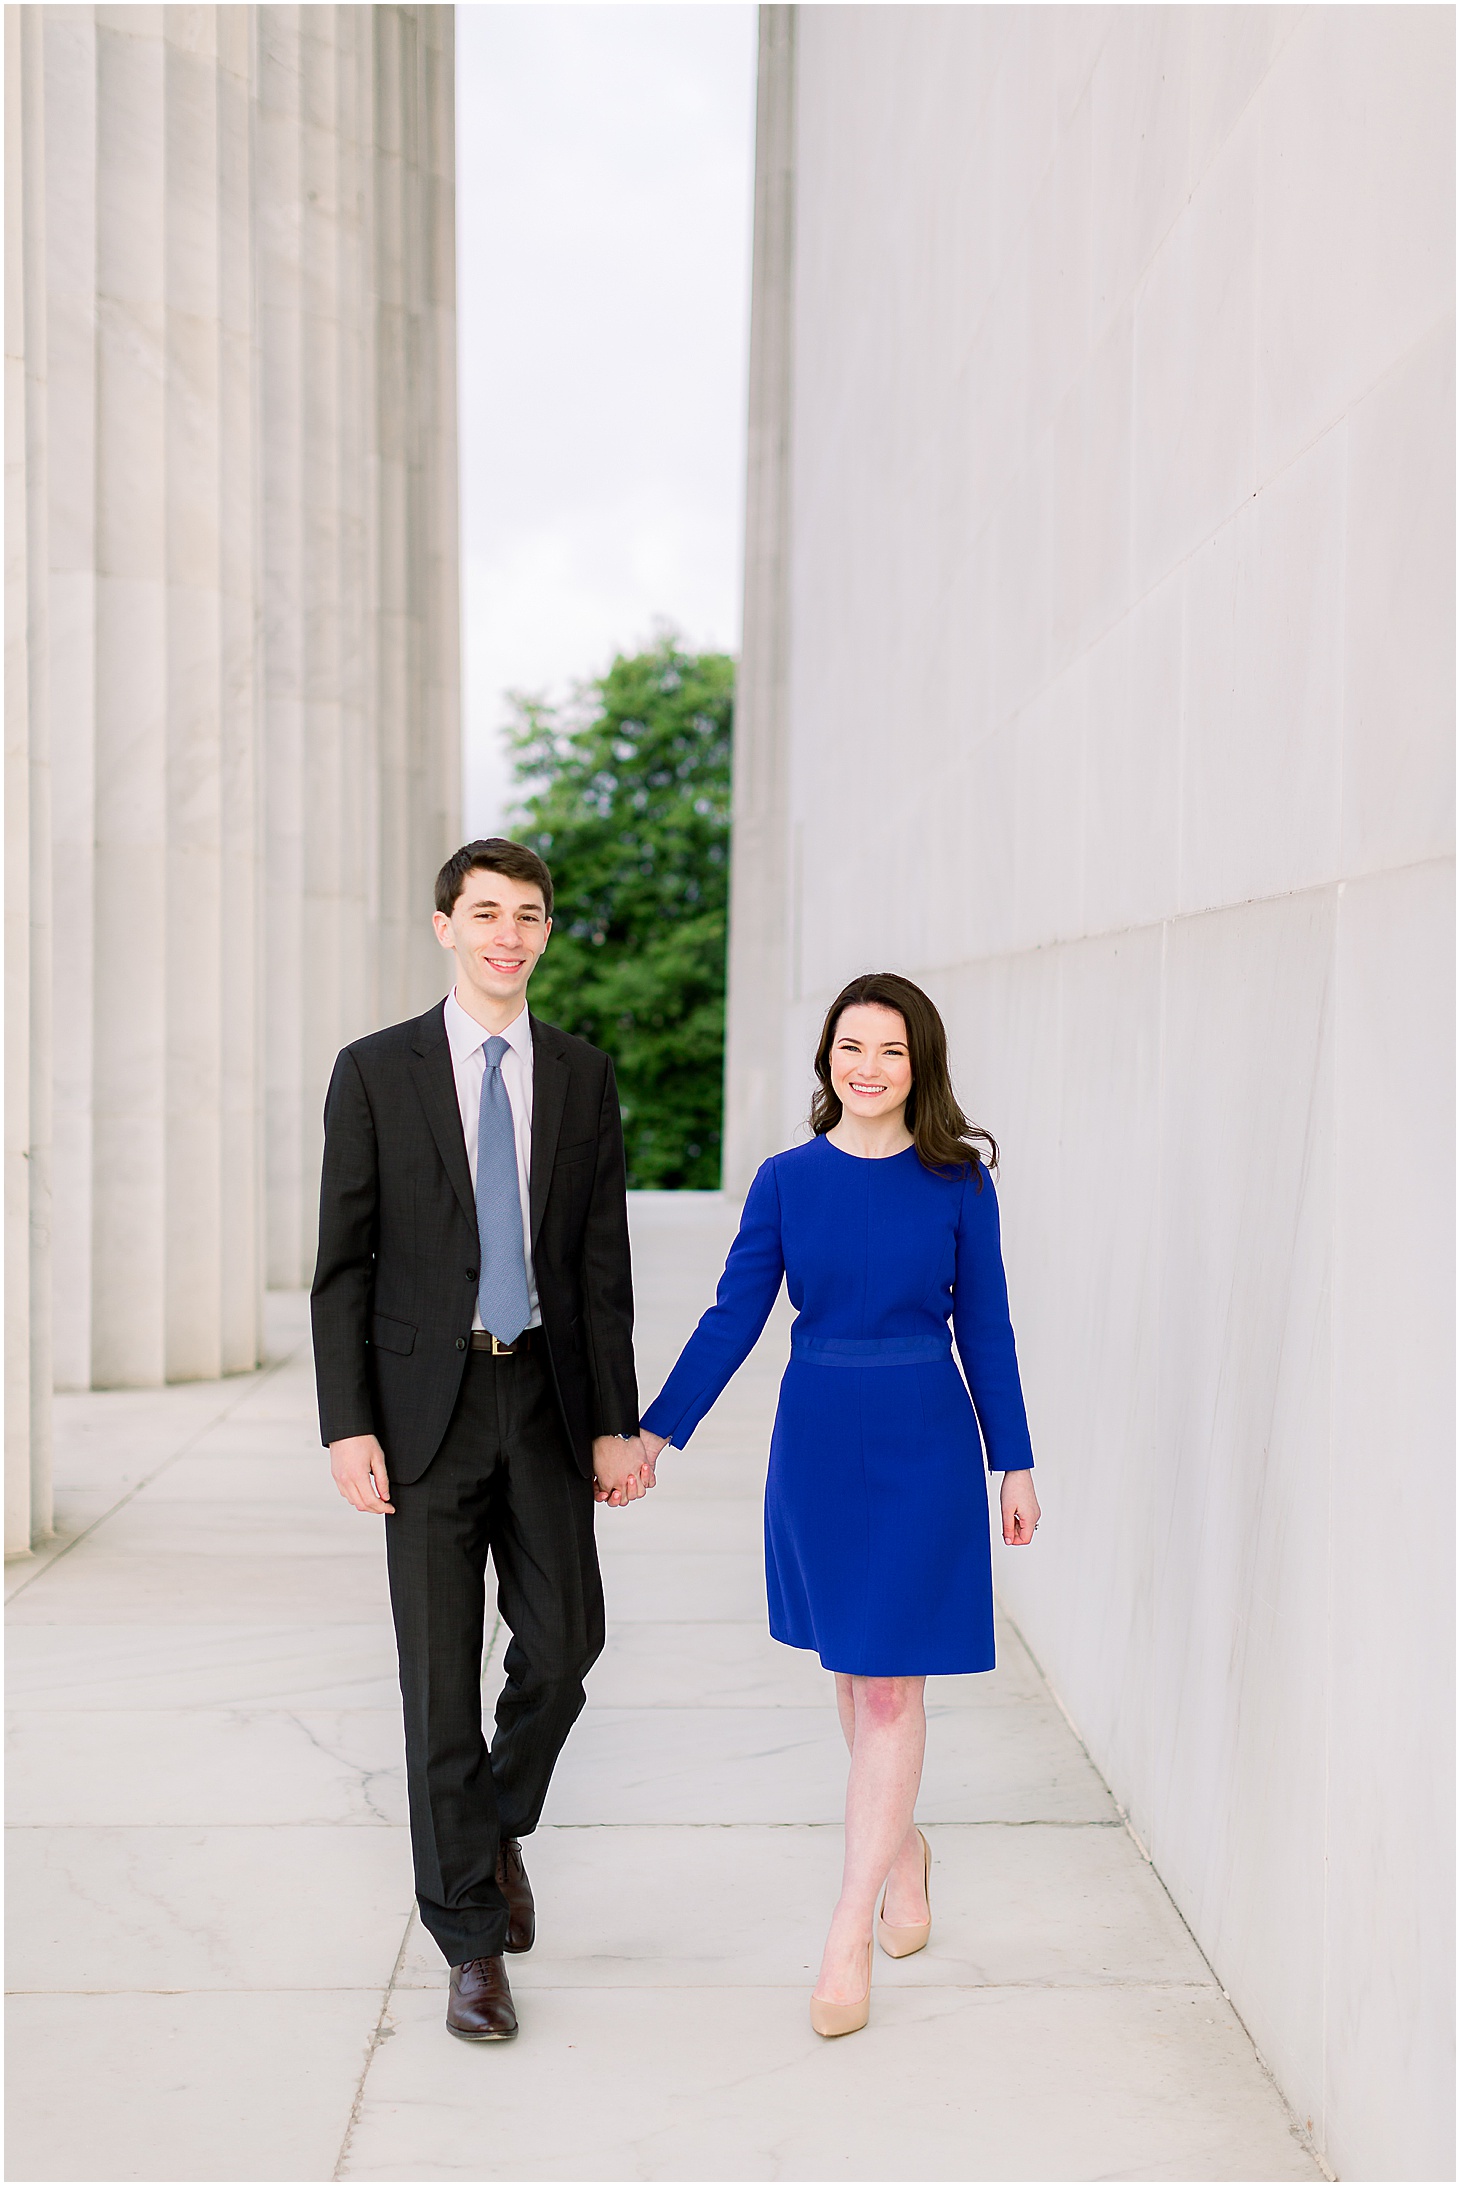 Engagement Portraits at Lincoln Memorial in DC, Spring Blooms Engagement Session at the United States Supreme Court, Sarah Bradshaw Photography, DC Engagement Photographer